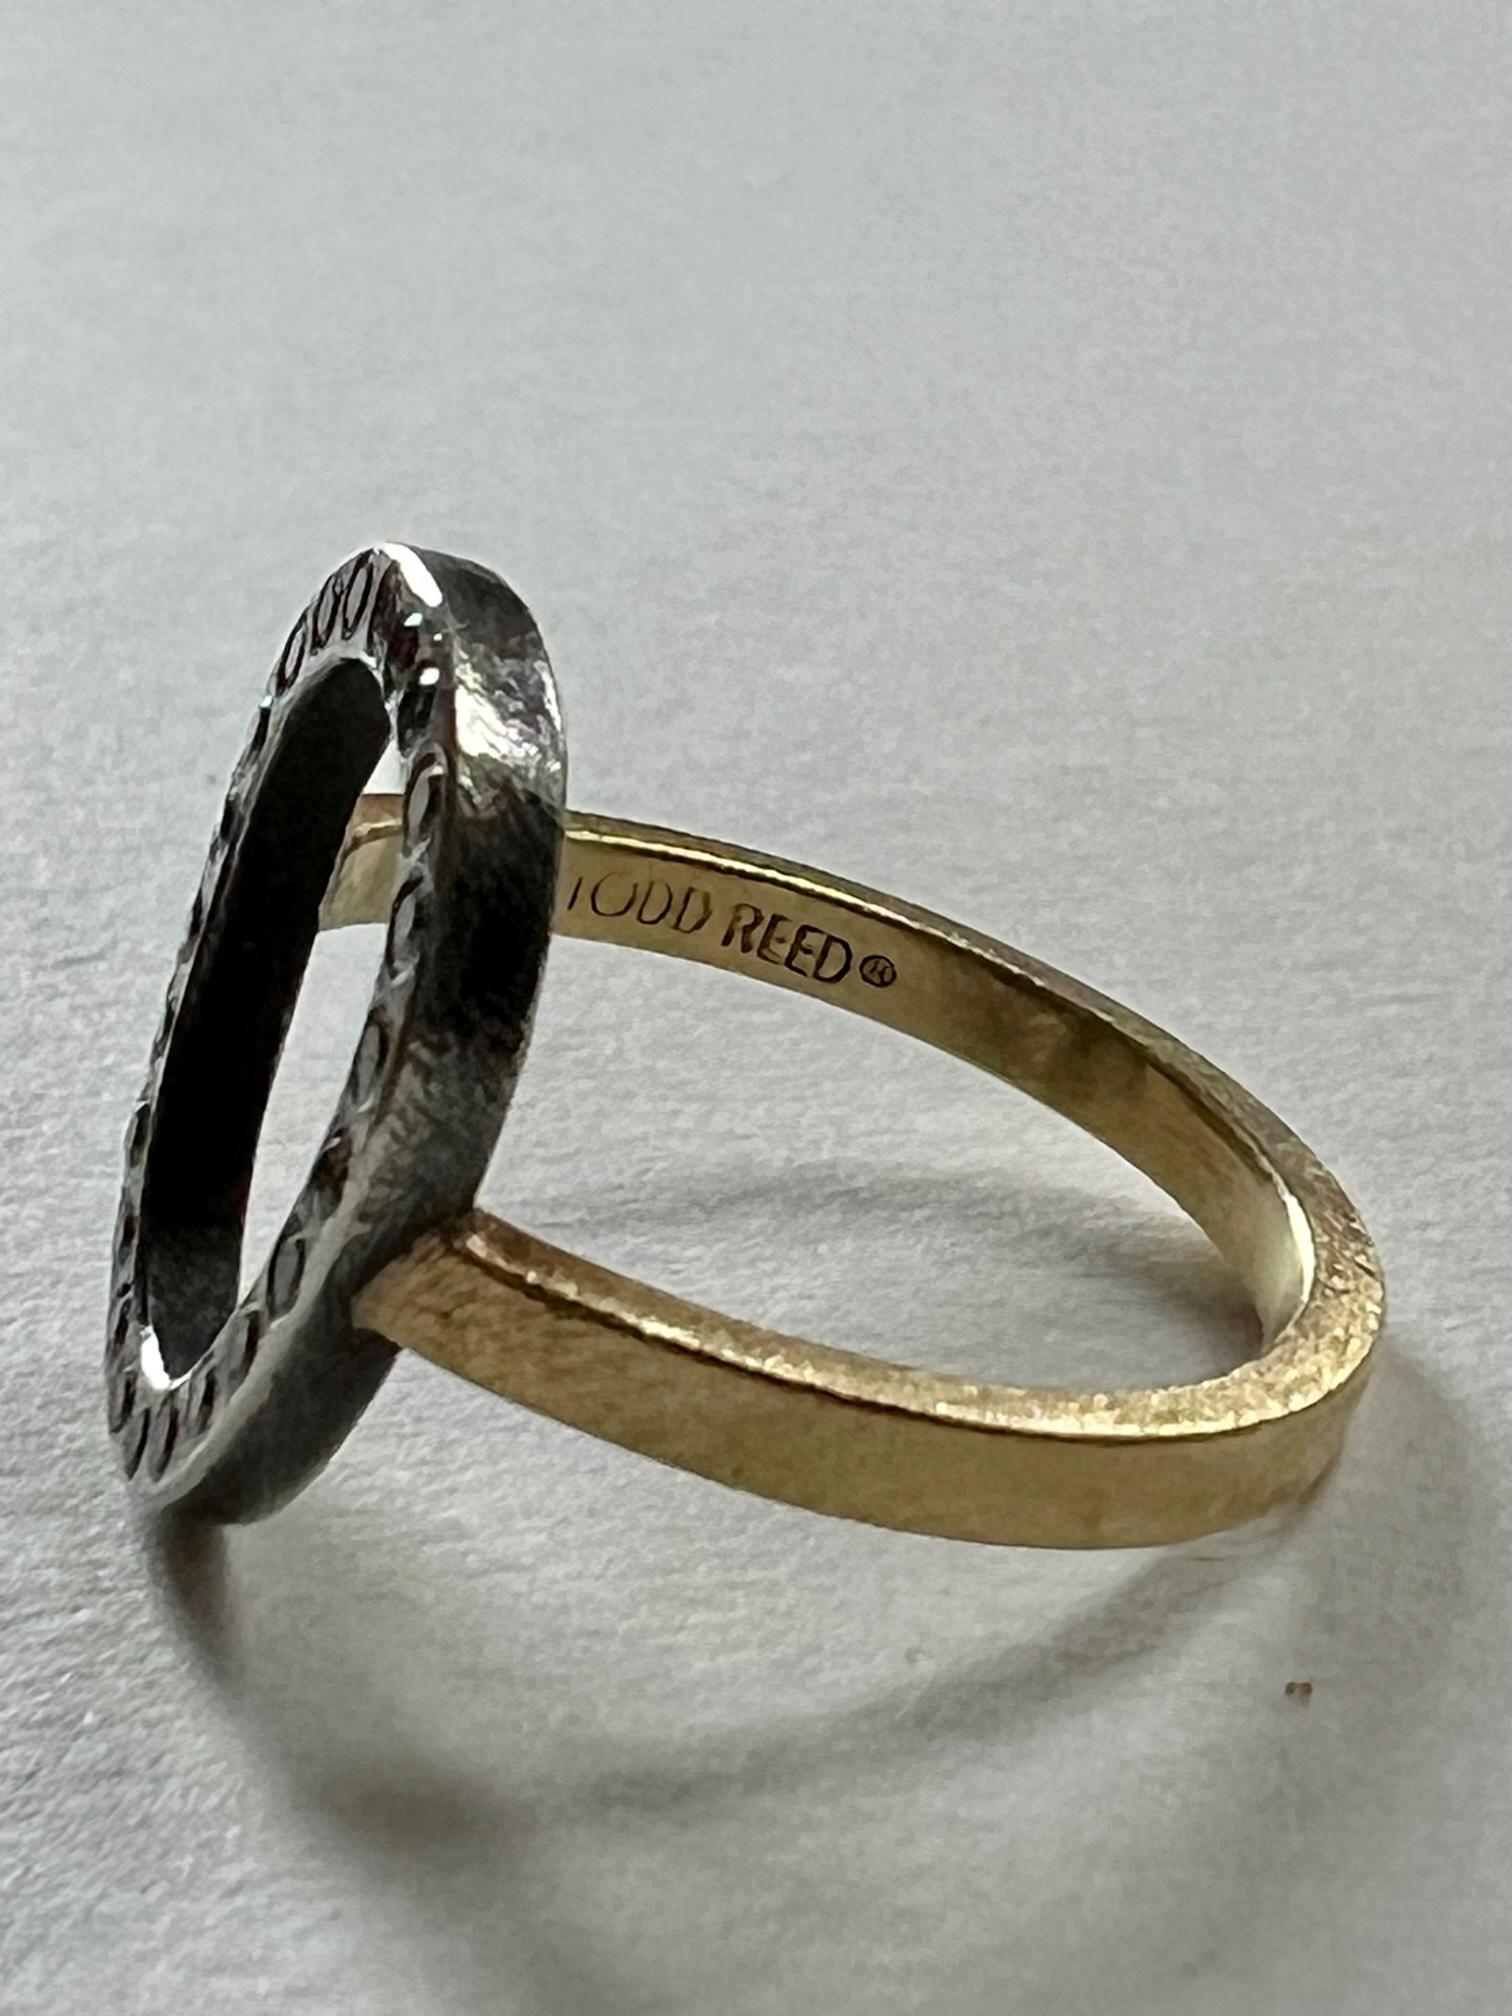 Todd Reed White Diamond Gold And Silver Open Frame Ring In Good Condition For Sale In Boulder, CO